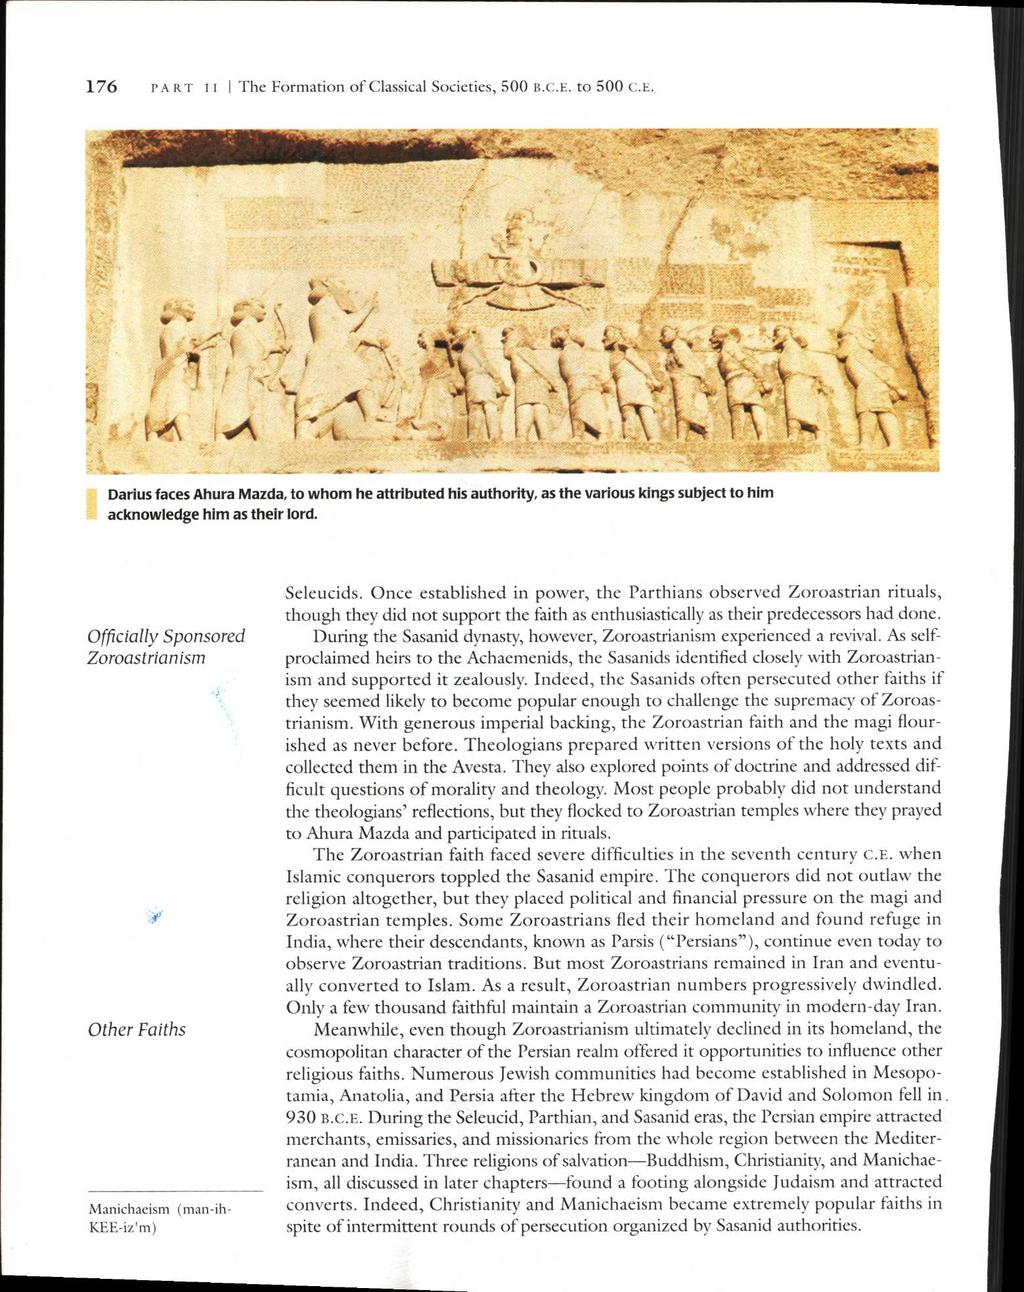 176 PART II I The Formation of Classical Societies, 500 B.C.E. to 500 C.E. Darius faces Ahura Mazda, to whom he attributed his authority, as the various kings subject to him acknowledge him as their lord.